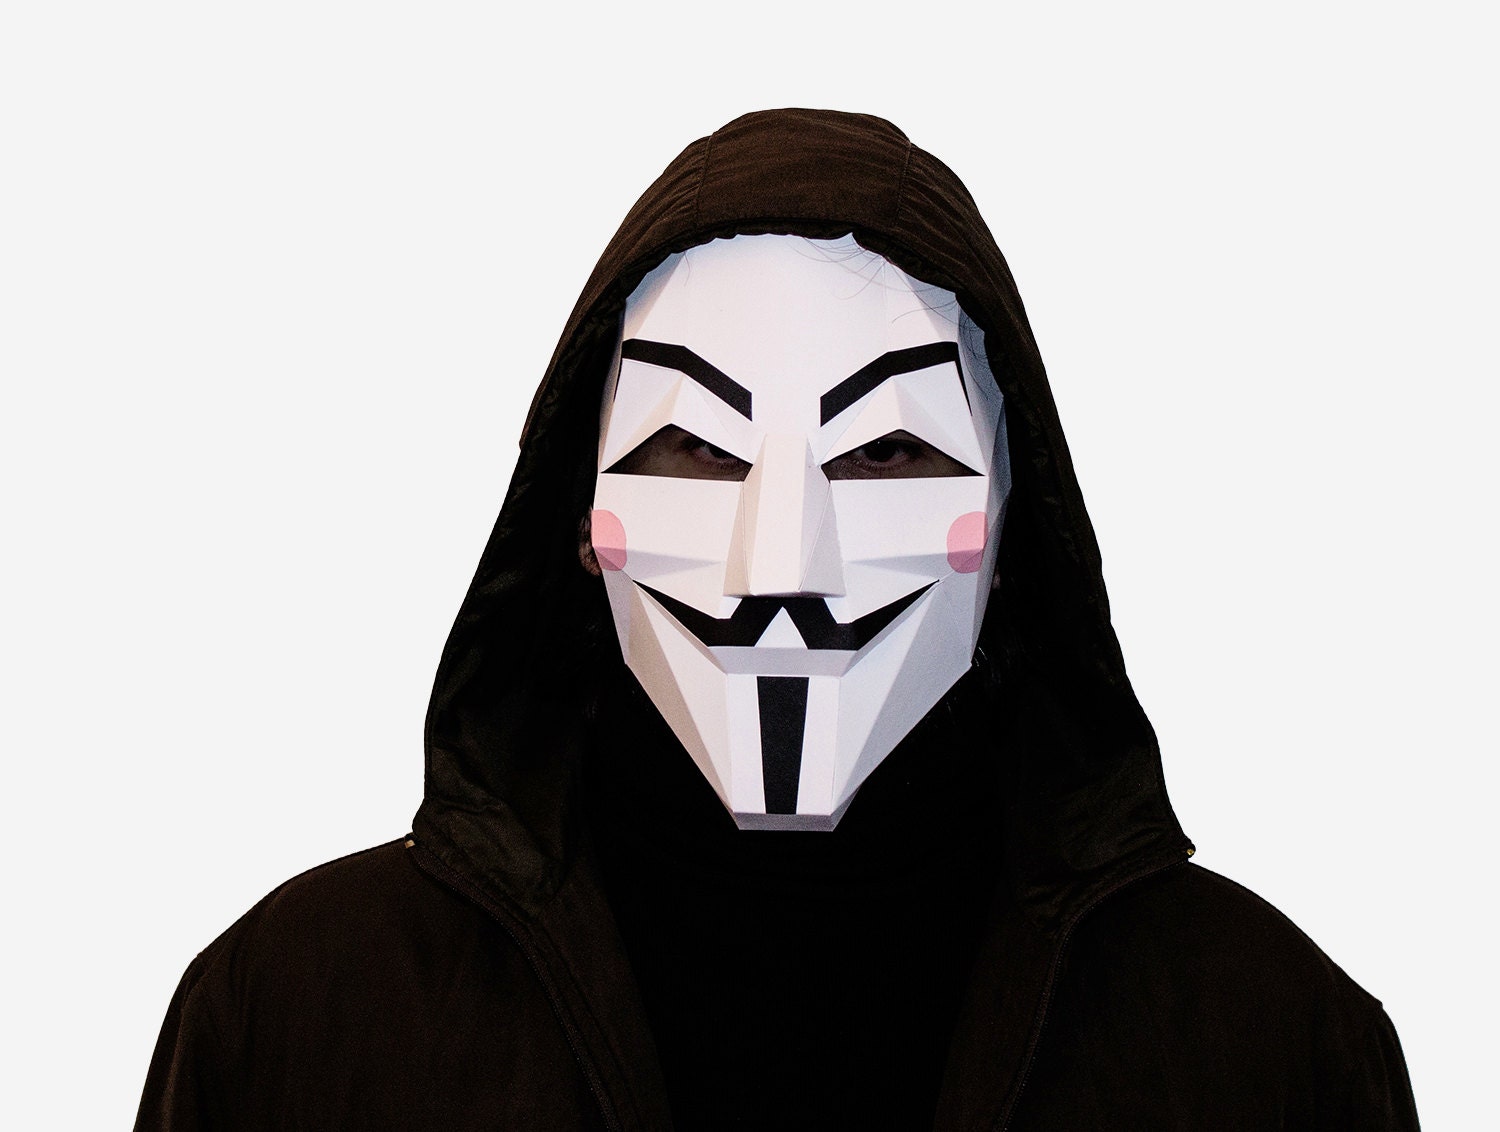 Super Anonymiss  Guy fawkes mask, Anonymous mask, Guy fawkes